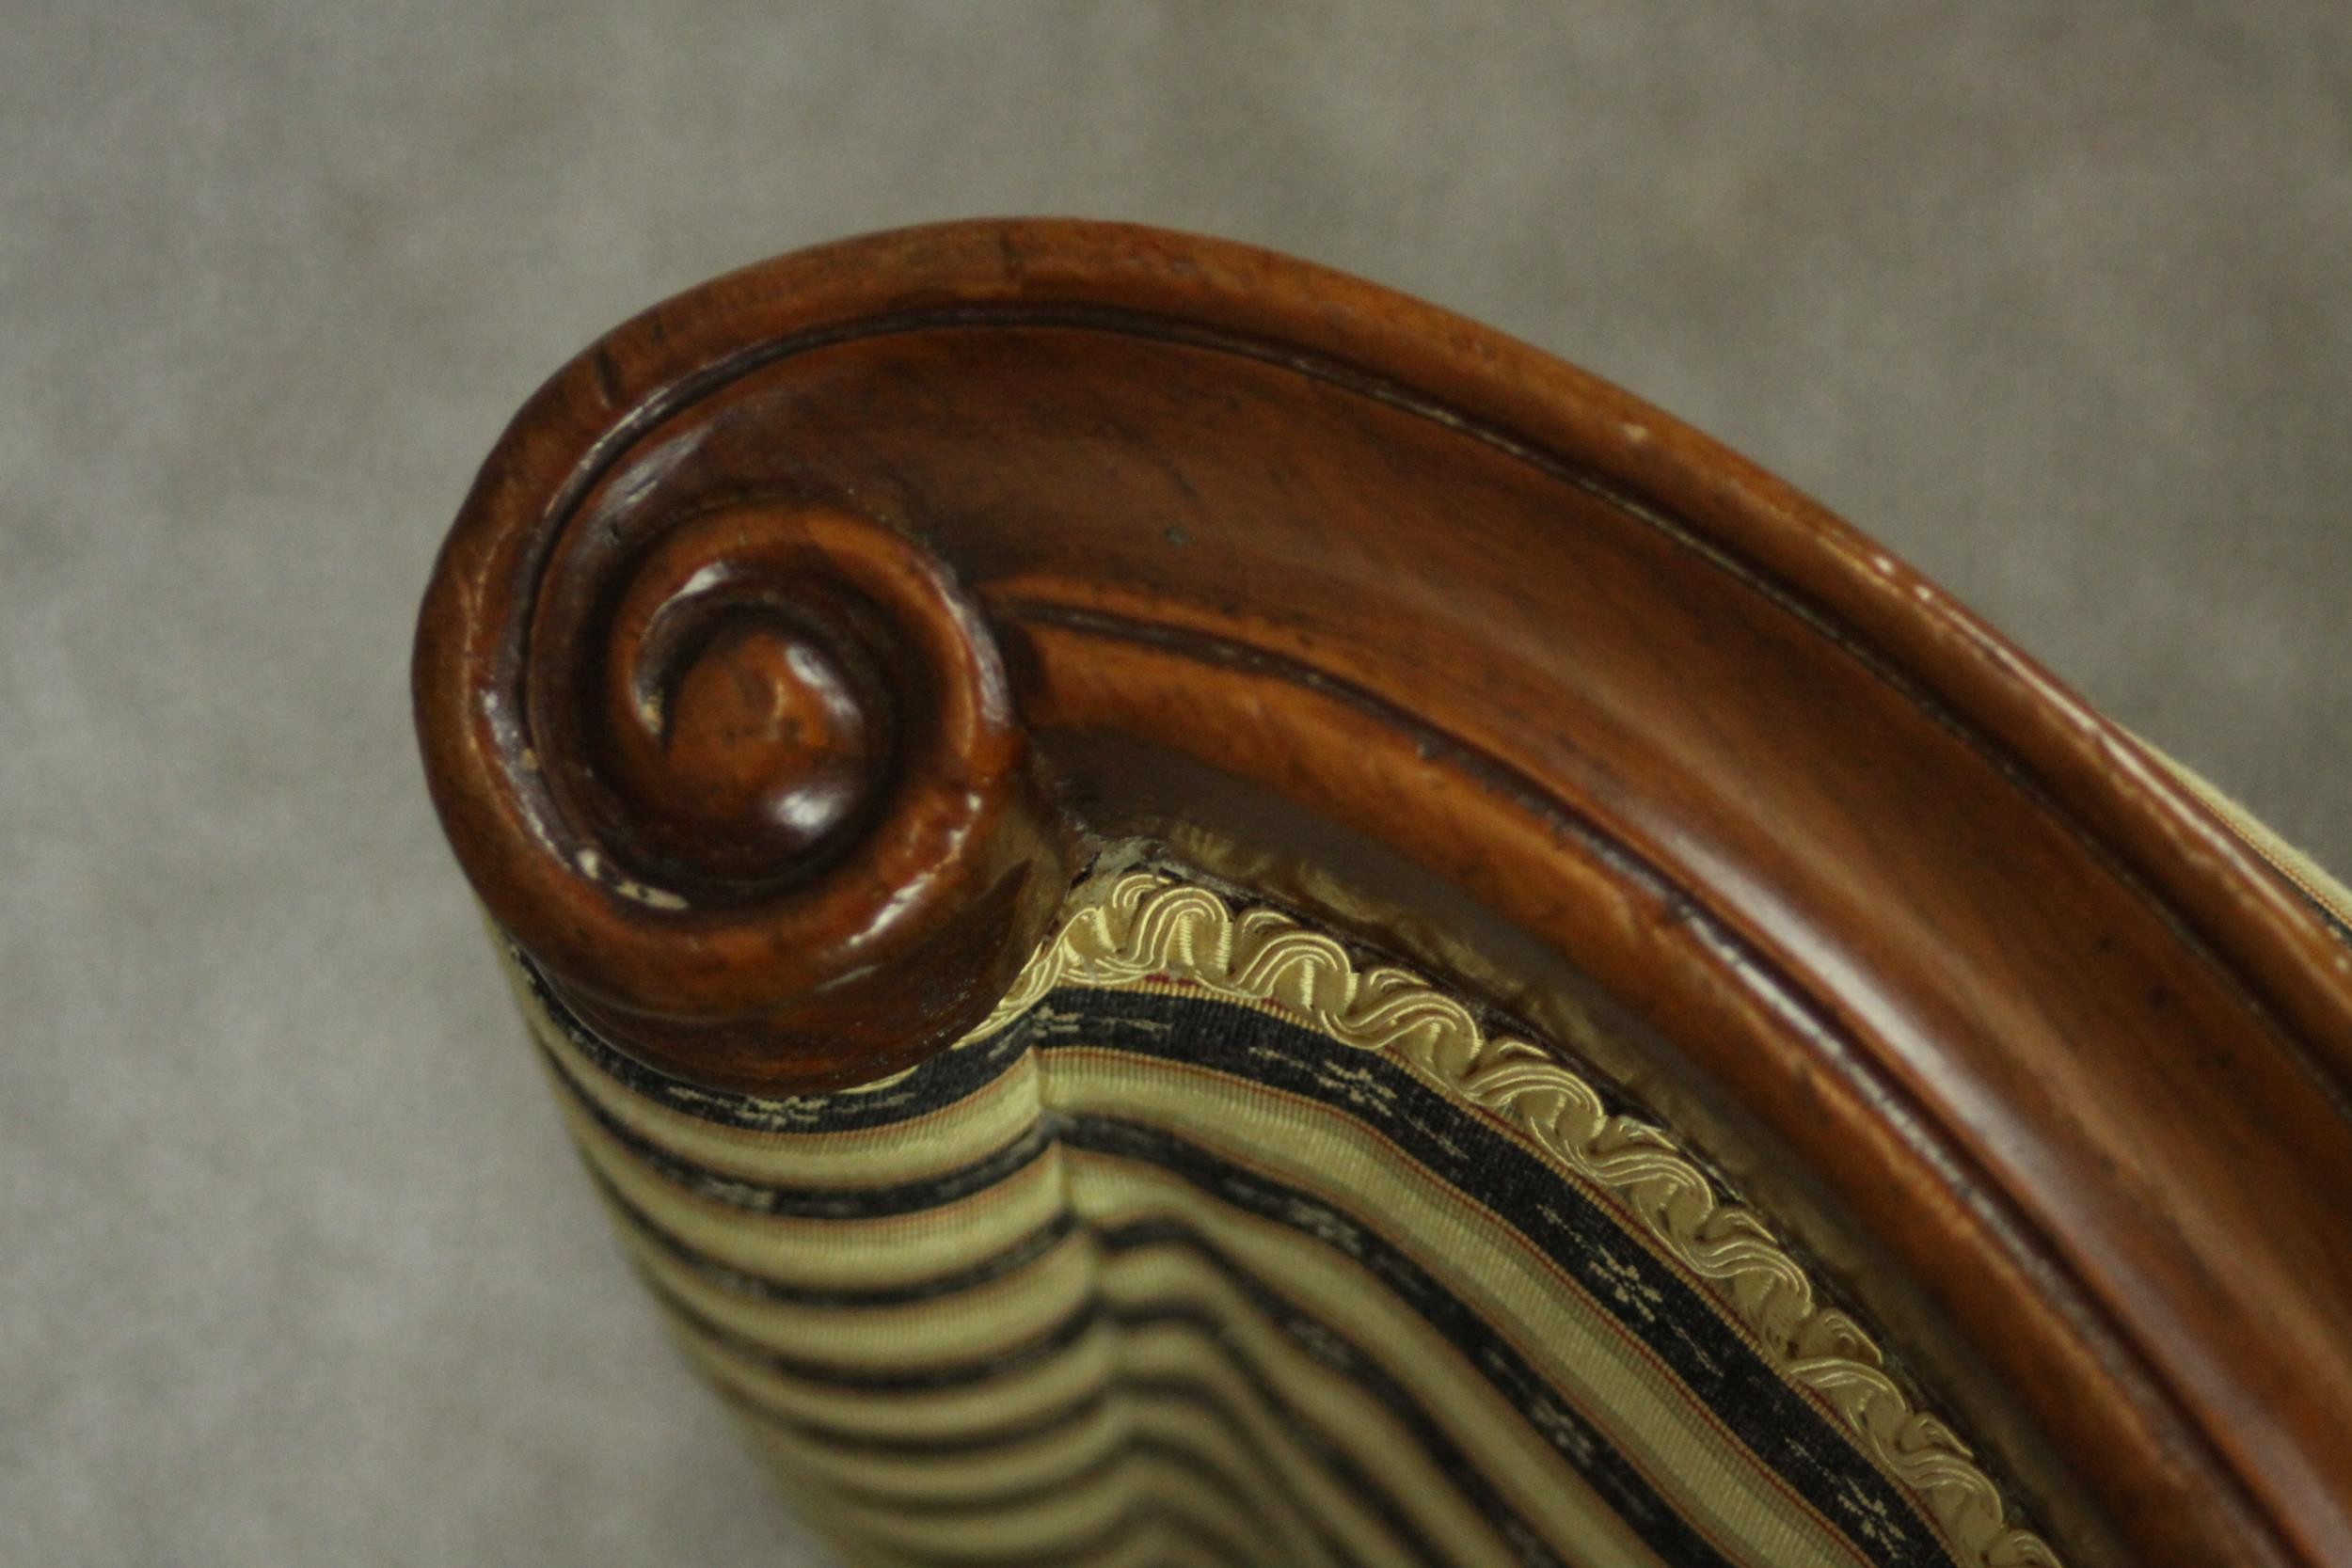 Two similar Victorian walnut slipper chairs, with striped upholstery, one with open arms, on - Image 19 of 21